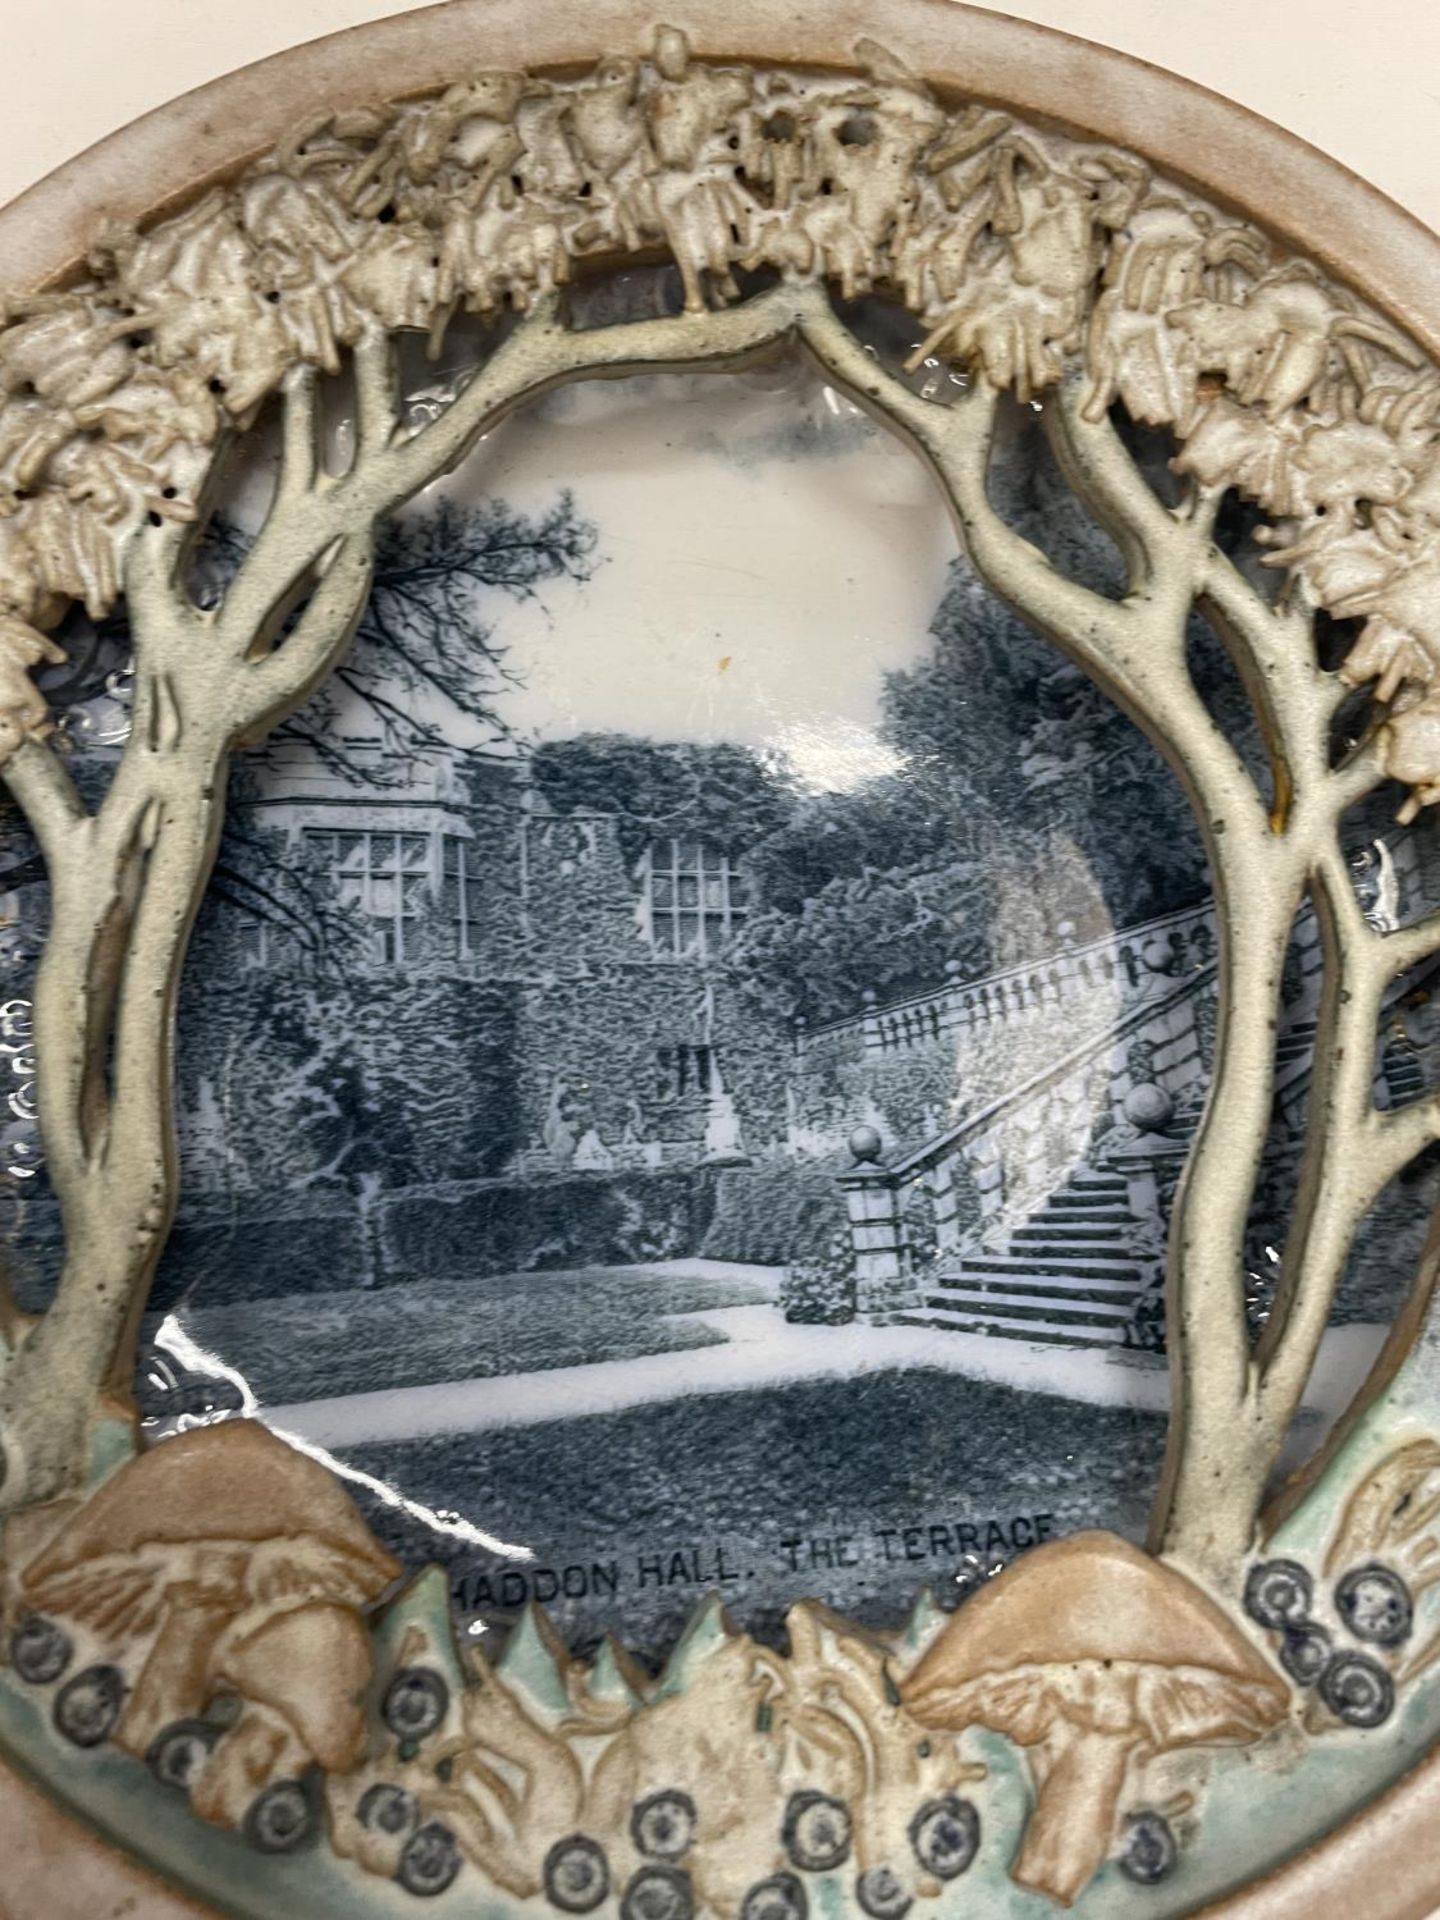 A HADDON HALL WALL PLAQUE WITH A 3D EFFECT SCENE DIAMETER 28CM - Image 5 of 9